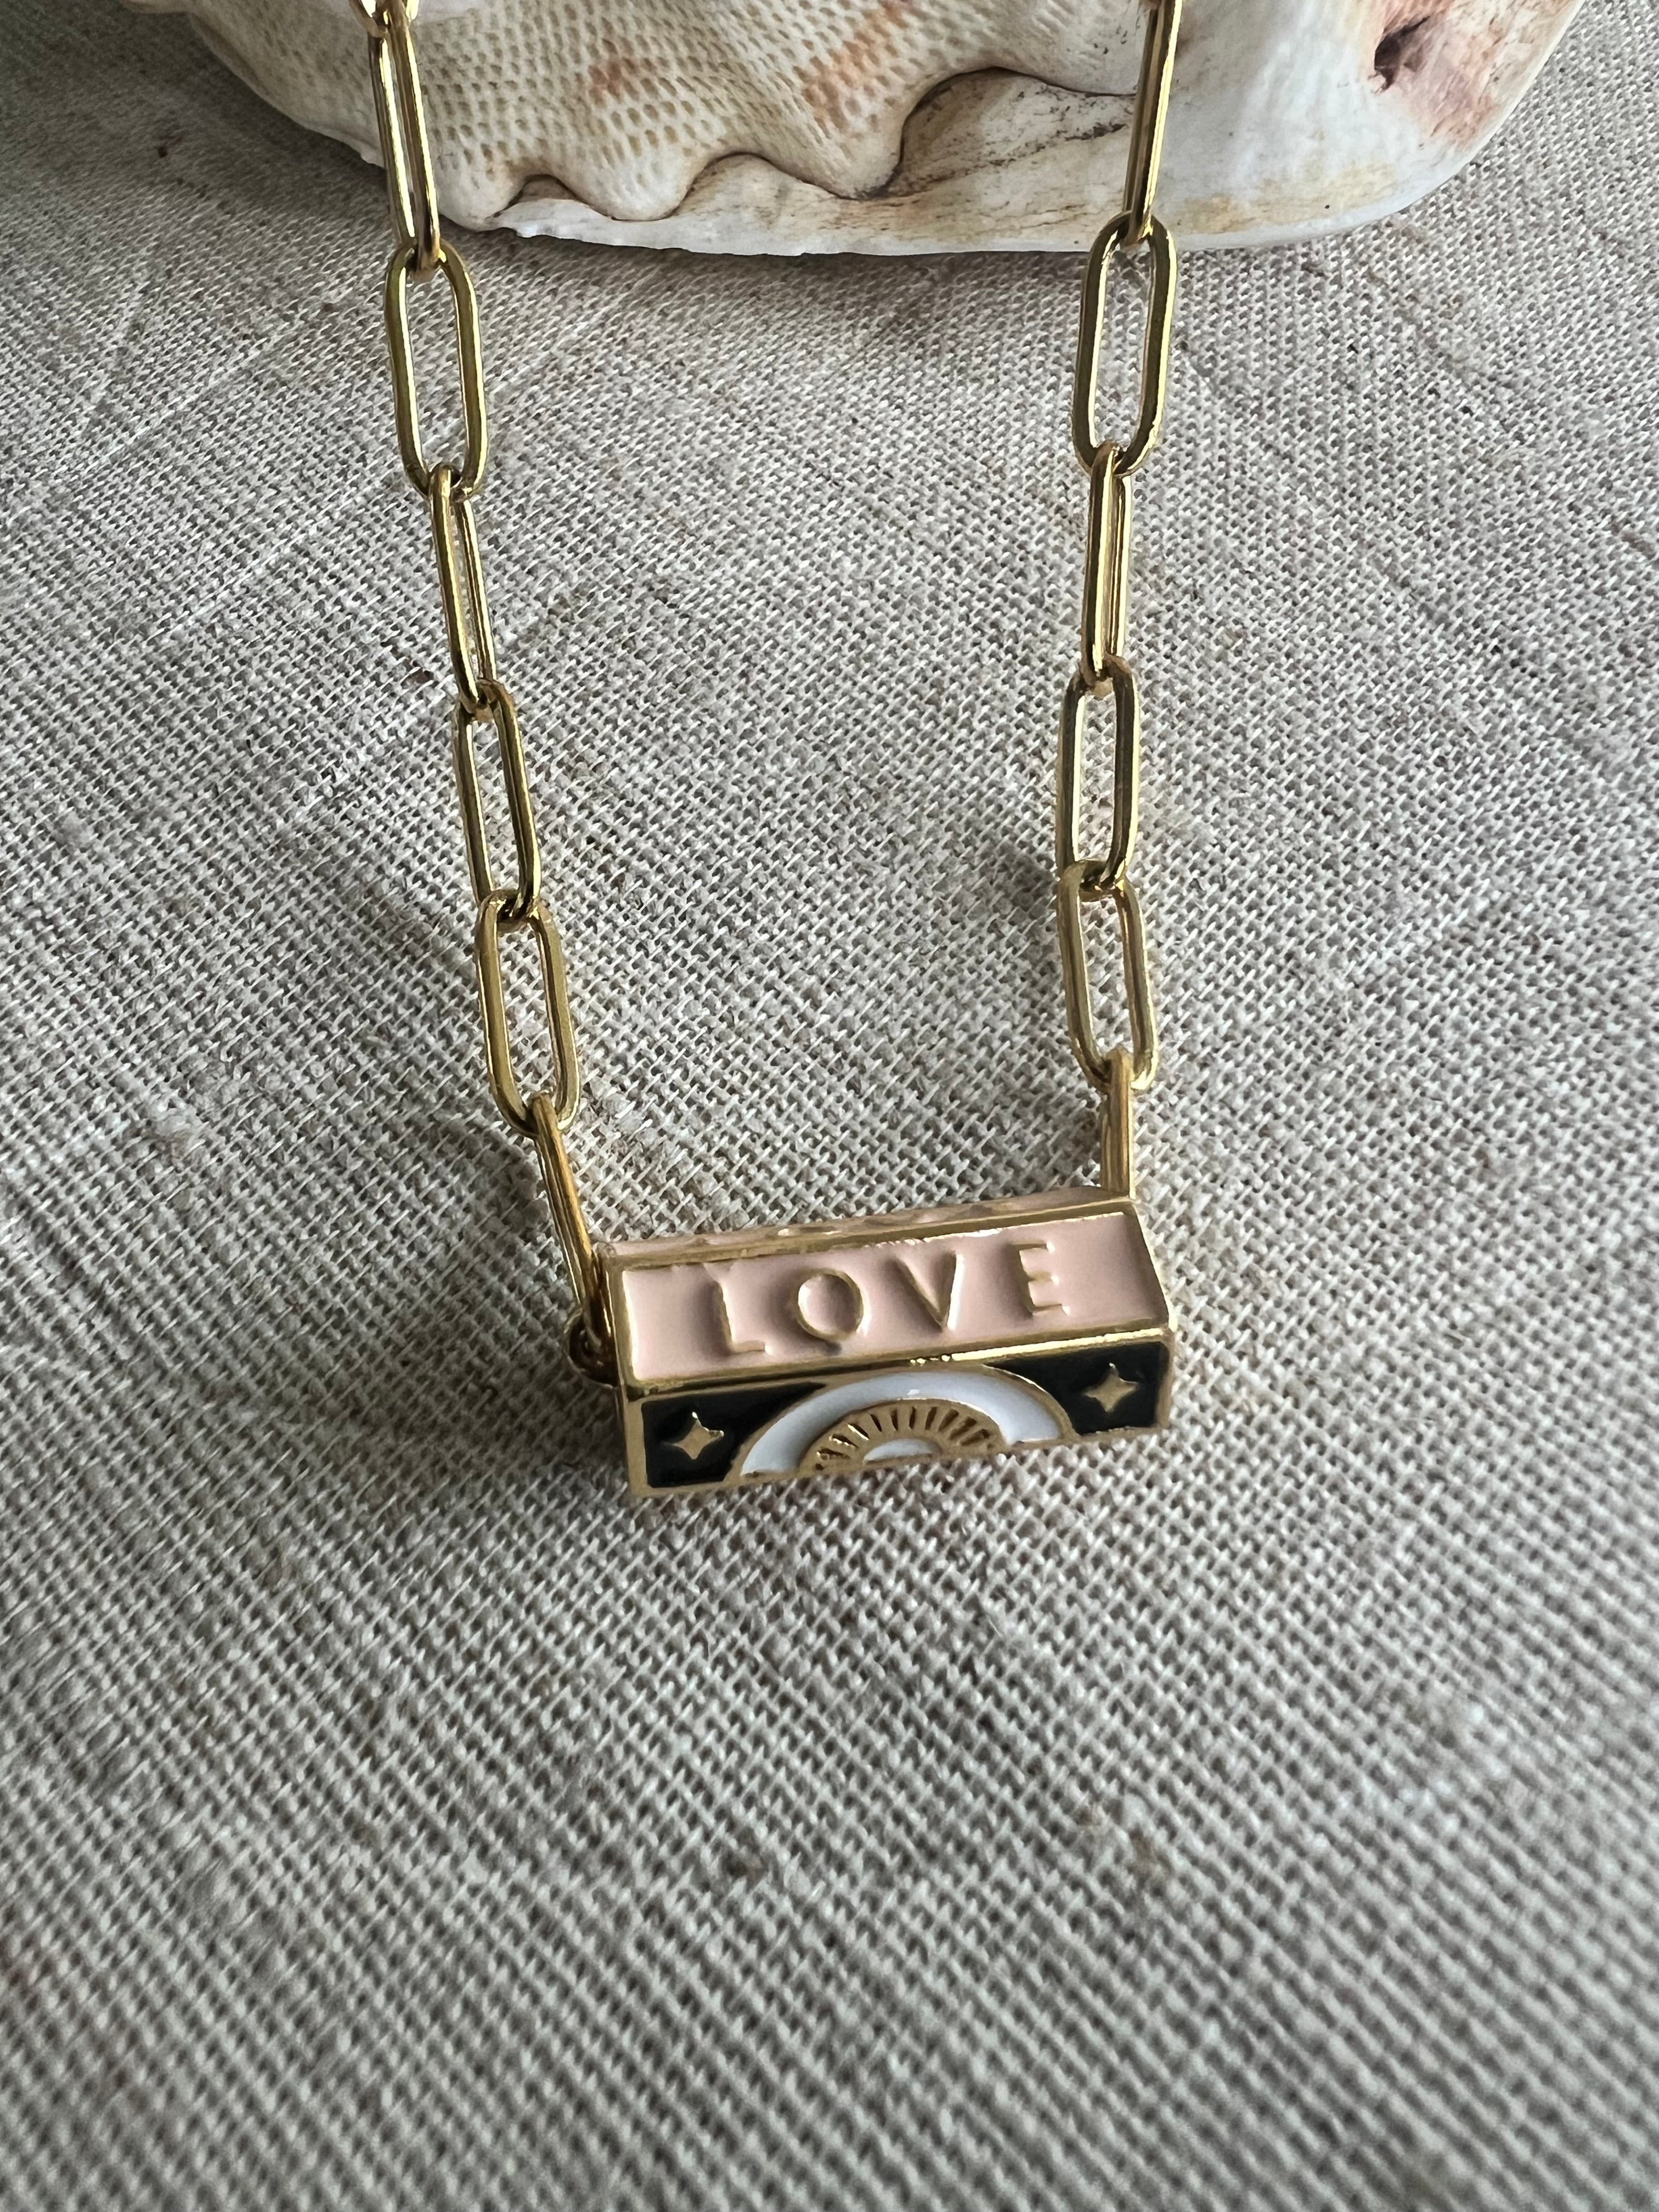 SOLD OUT‼️COSMIC Love Necklaces| Boxy Gold Chain NEW - Honorooroo Lifestyle